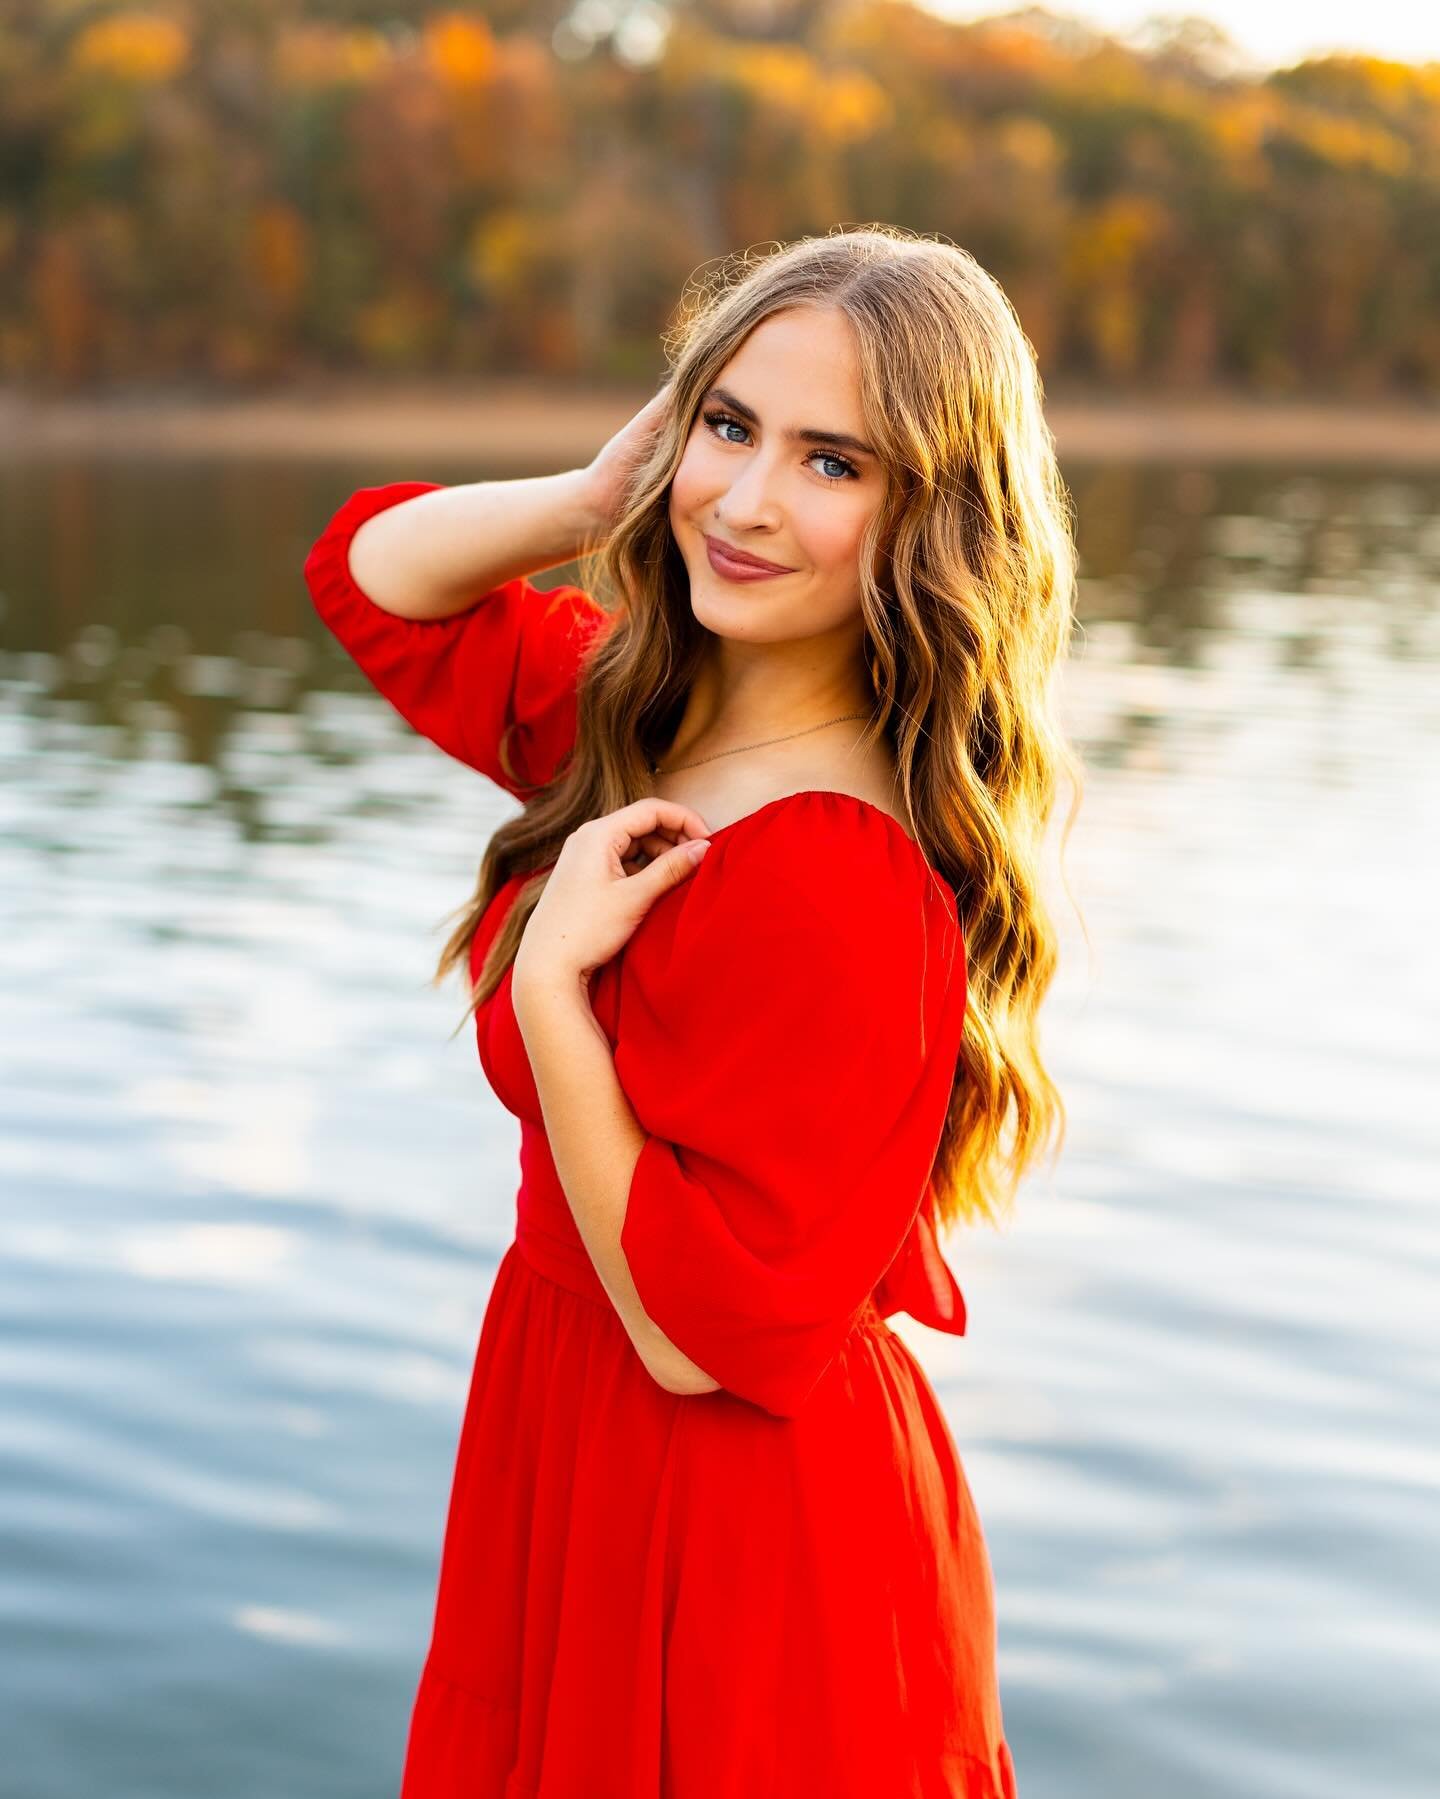 If you&rsquo;re wanting peak fall colors, October is IT. 🍂🍁 I am soo excited for summer but fall is one of my favorite times for photoshoots! 

#rogersphotographer #lakephotography #seniorphotos #seniorphotographer #nwaseniorphotographer #nwasenior